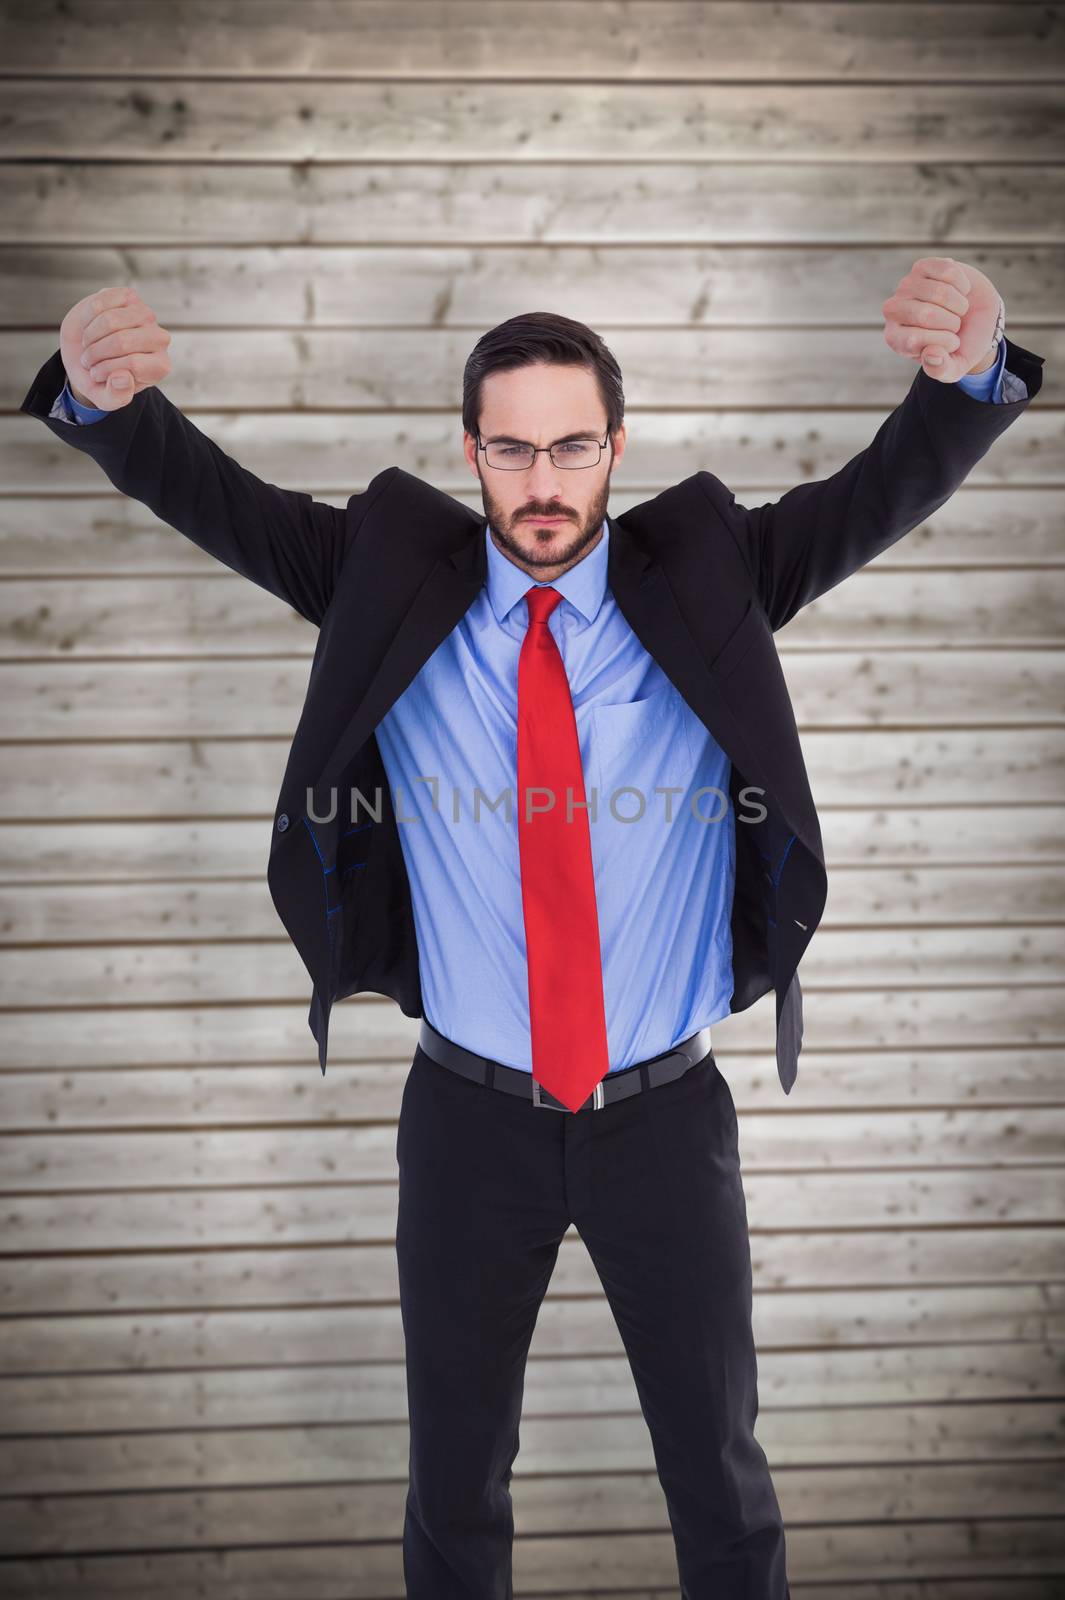 Composite image of unsmiling businessman standing with arms raised by Wavebreakmedia